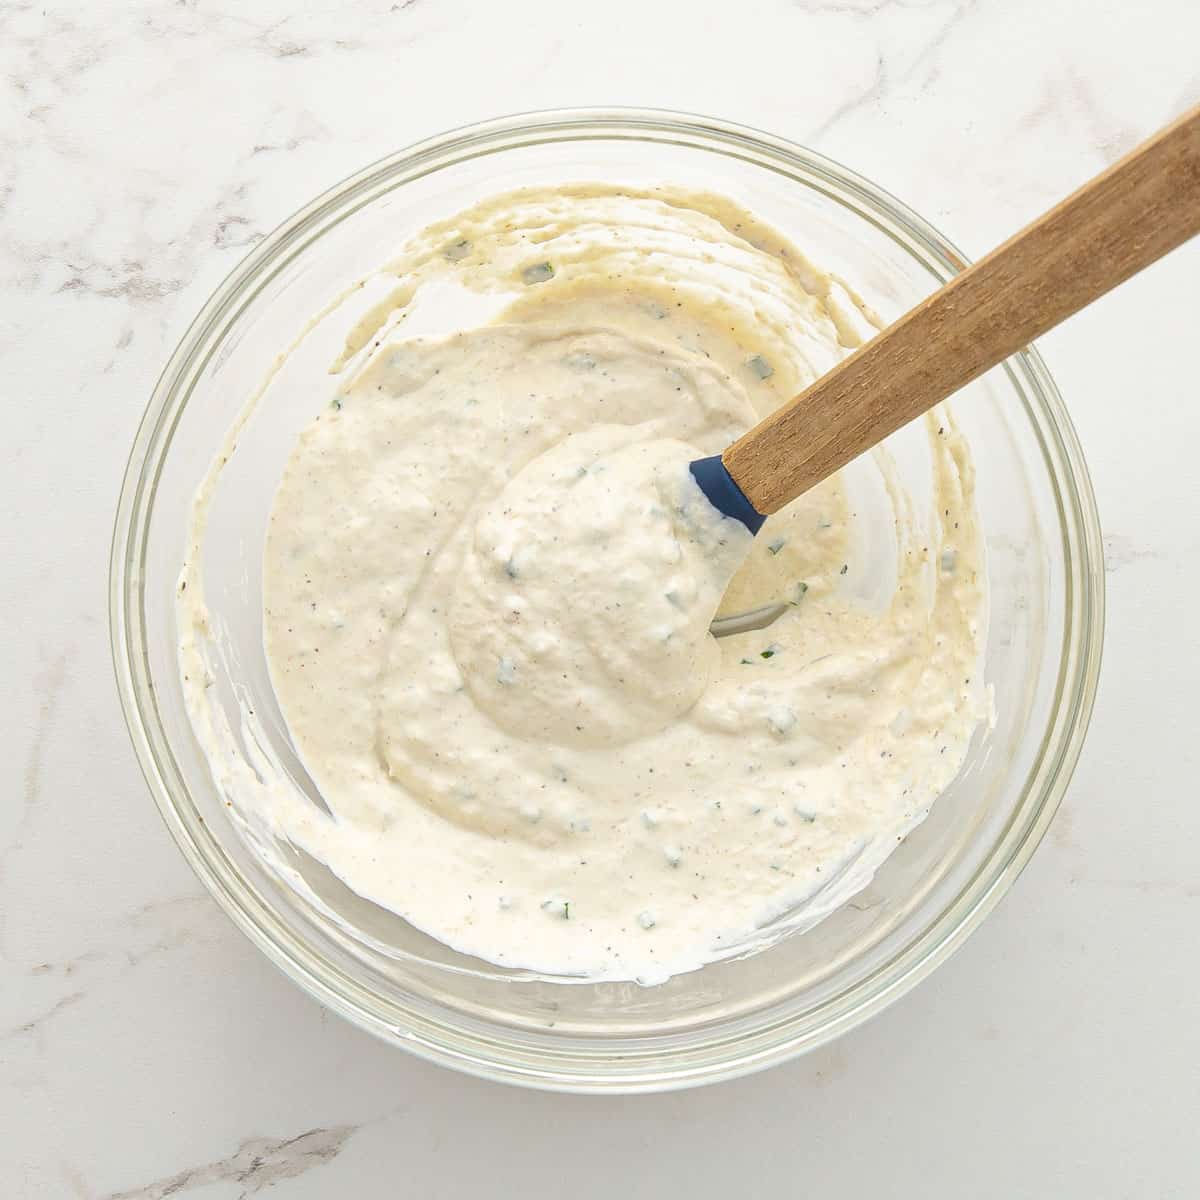 Horseradish sauce in a small mixing bowl with a wooden spoon.